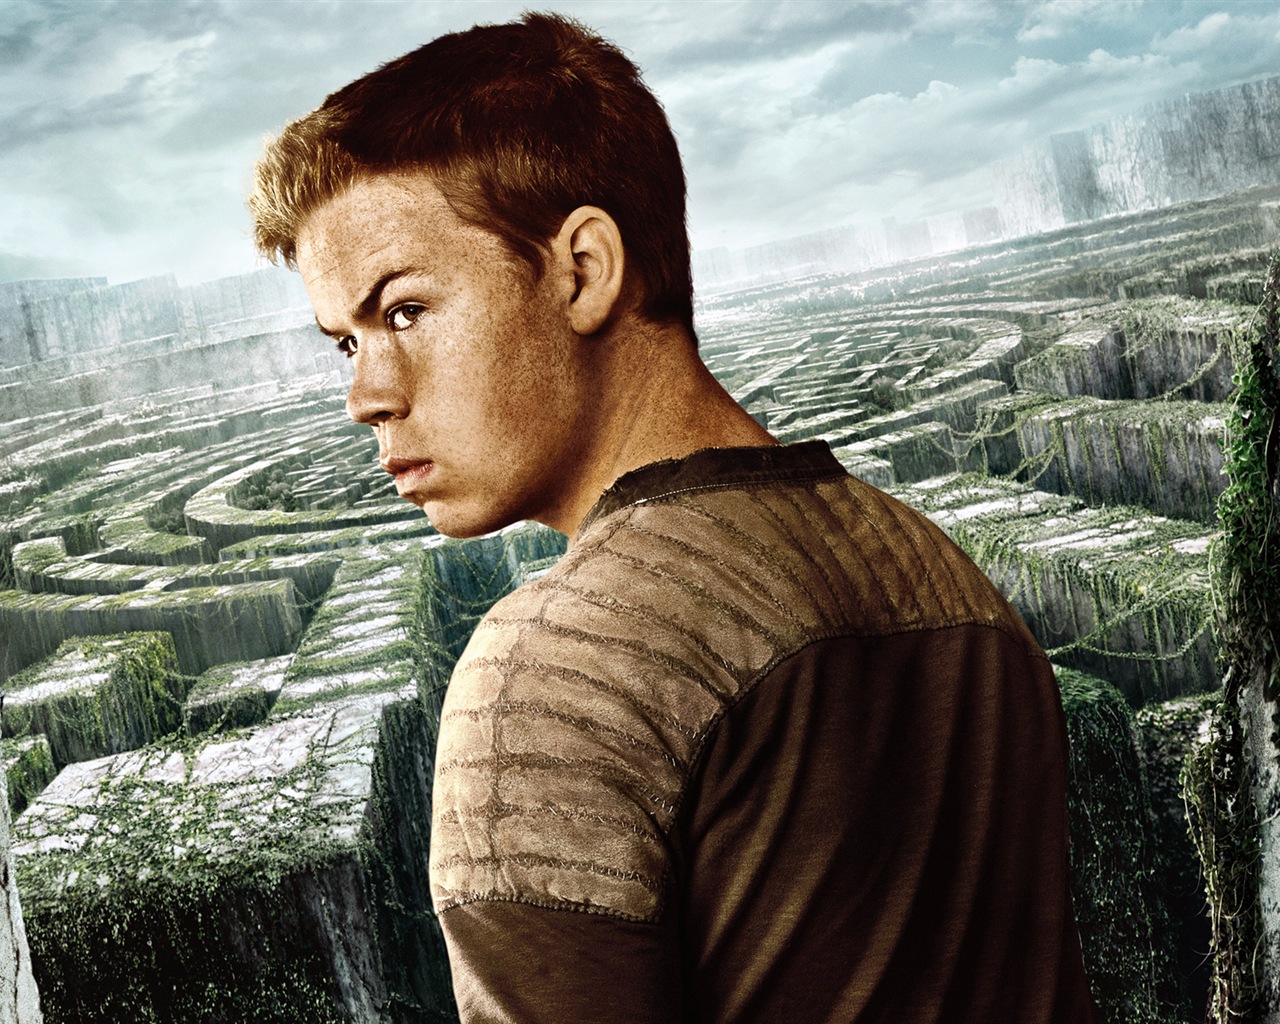 The Maze Runner HD movie wallpapers #11 - 1280x1024